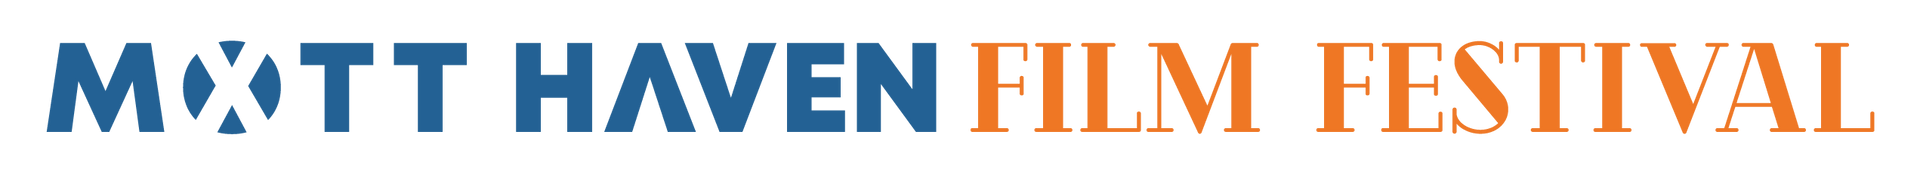 The matt haven film festival logo is blue and orange on a white background.